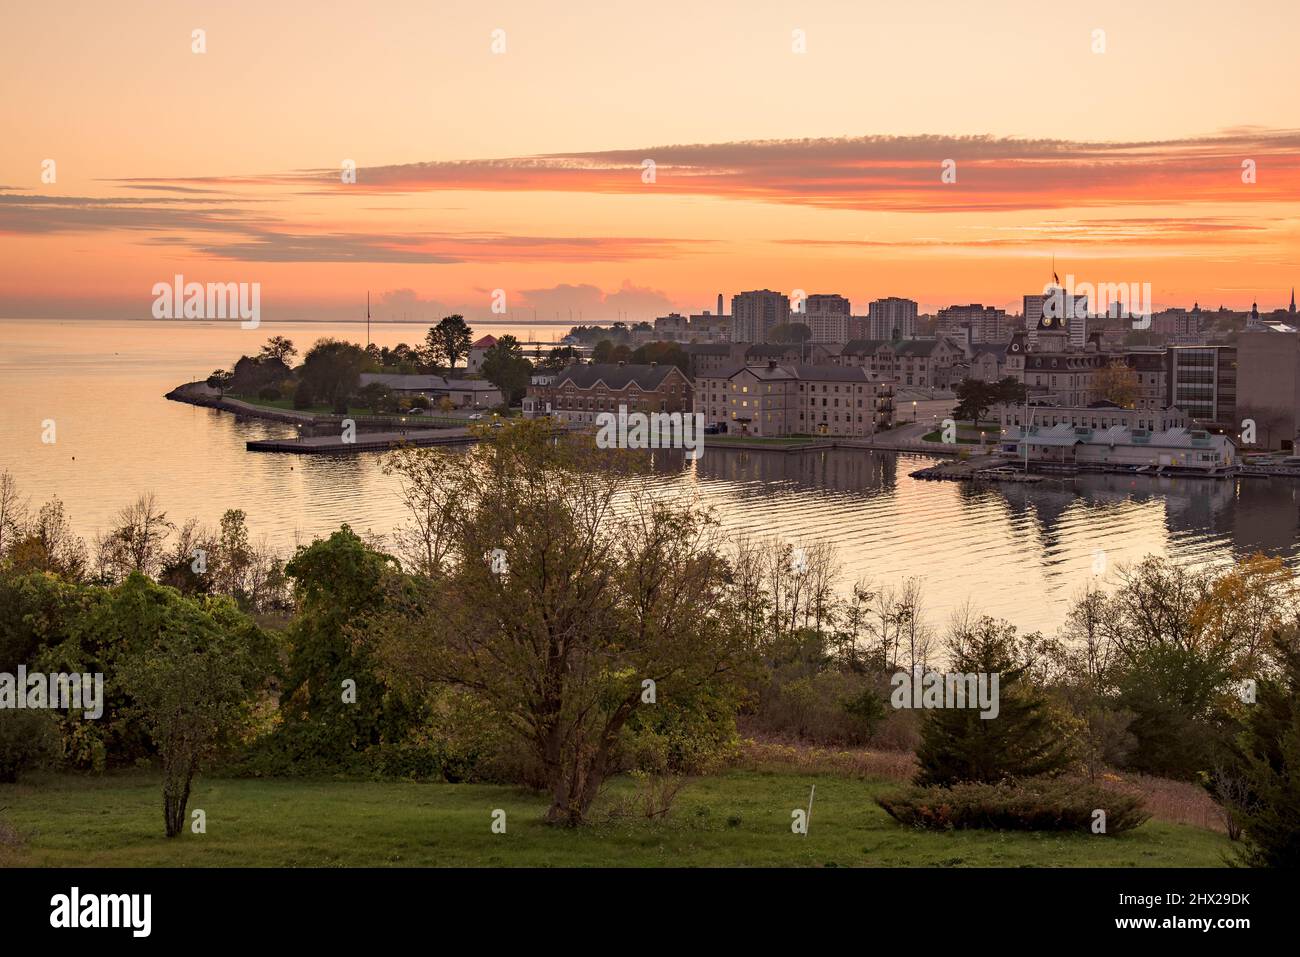 Autumn sunset over a city on the shores of a lake. An island with tall wind turbines is visible in background. Stock Photo